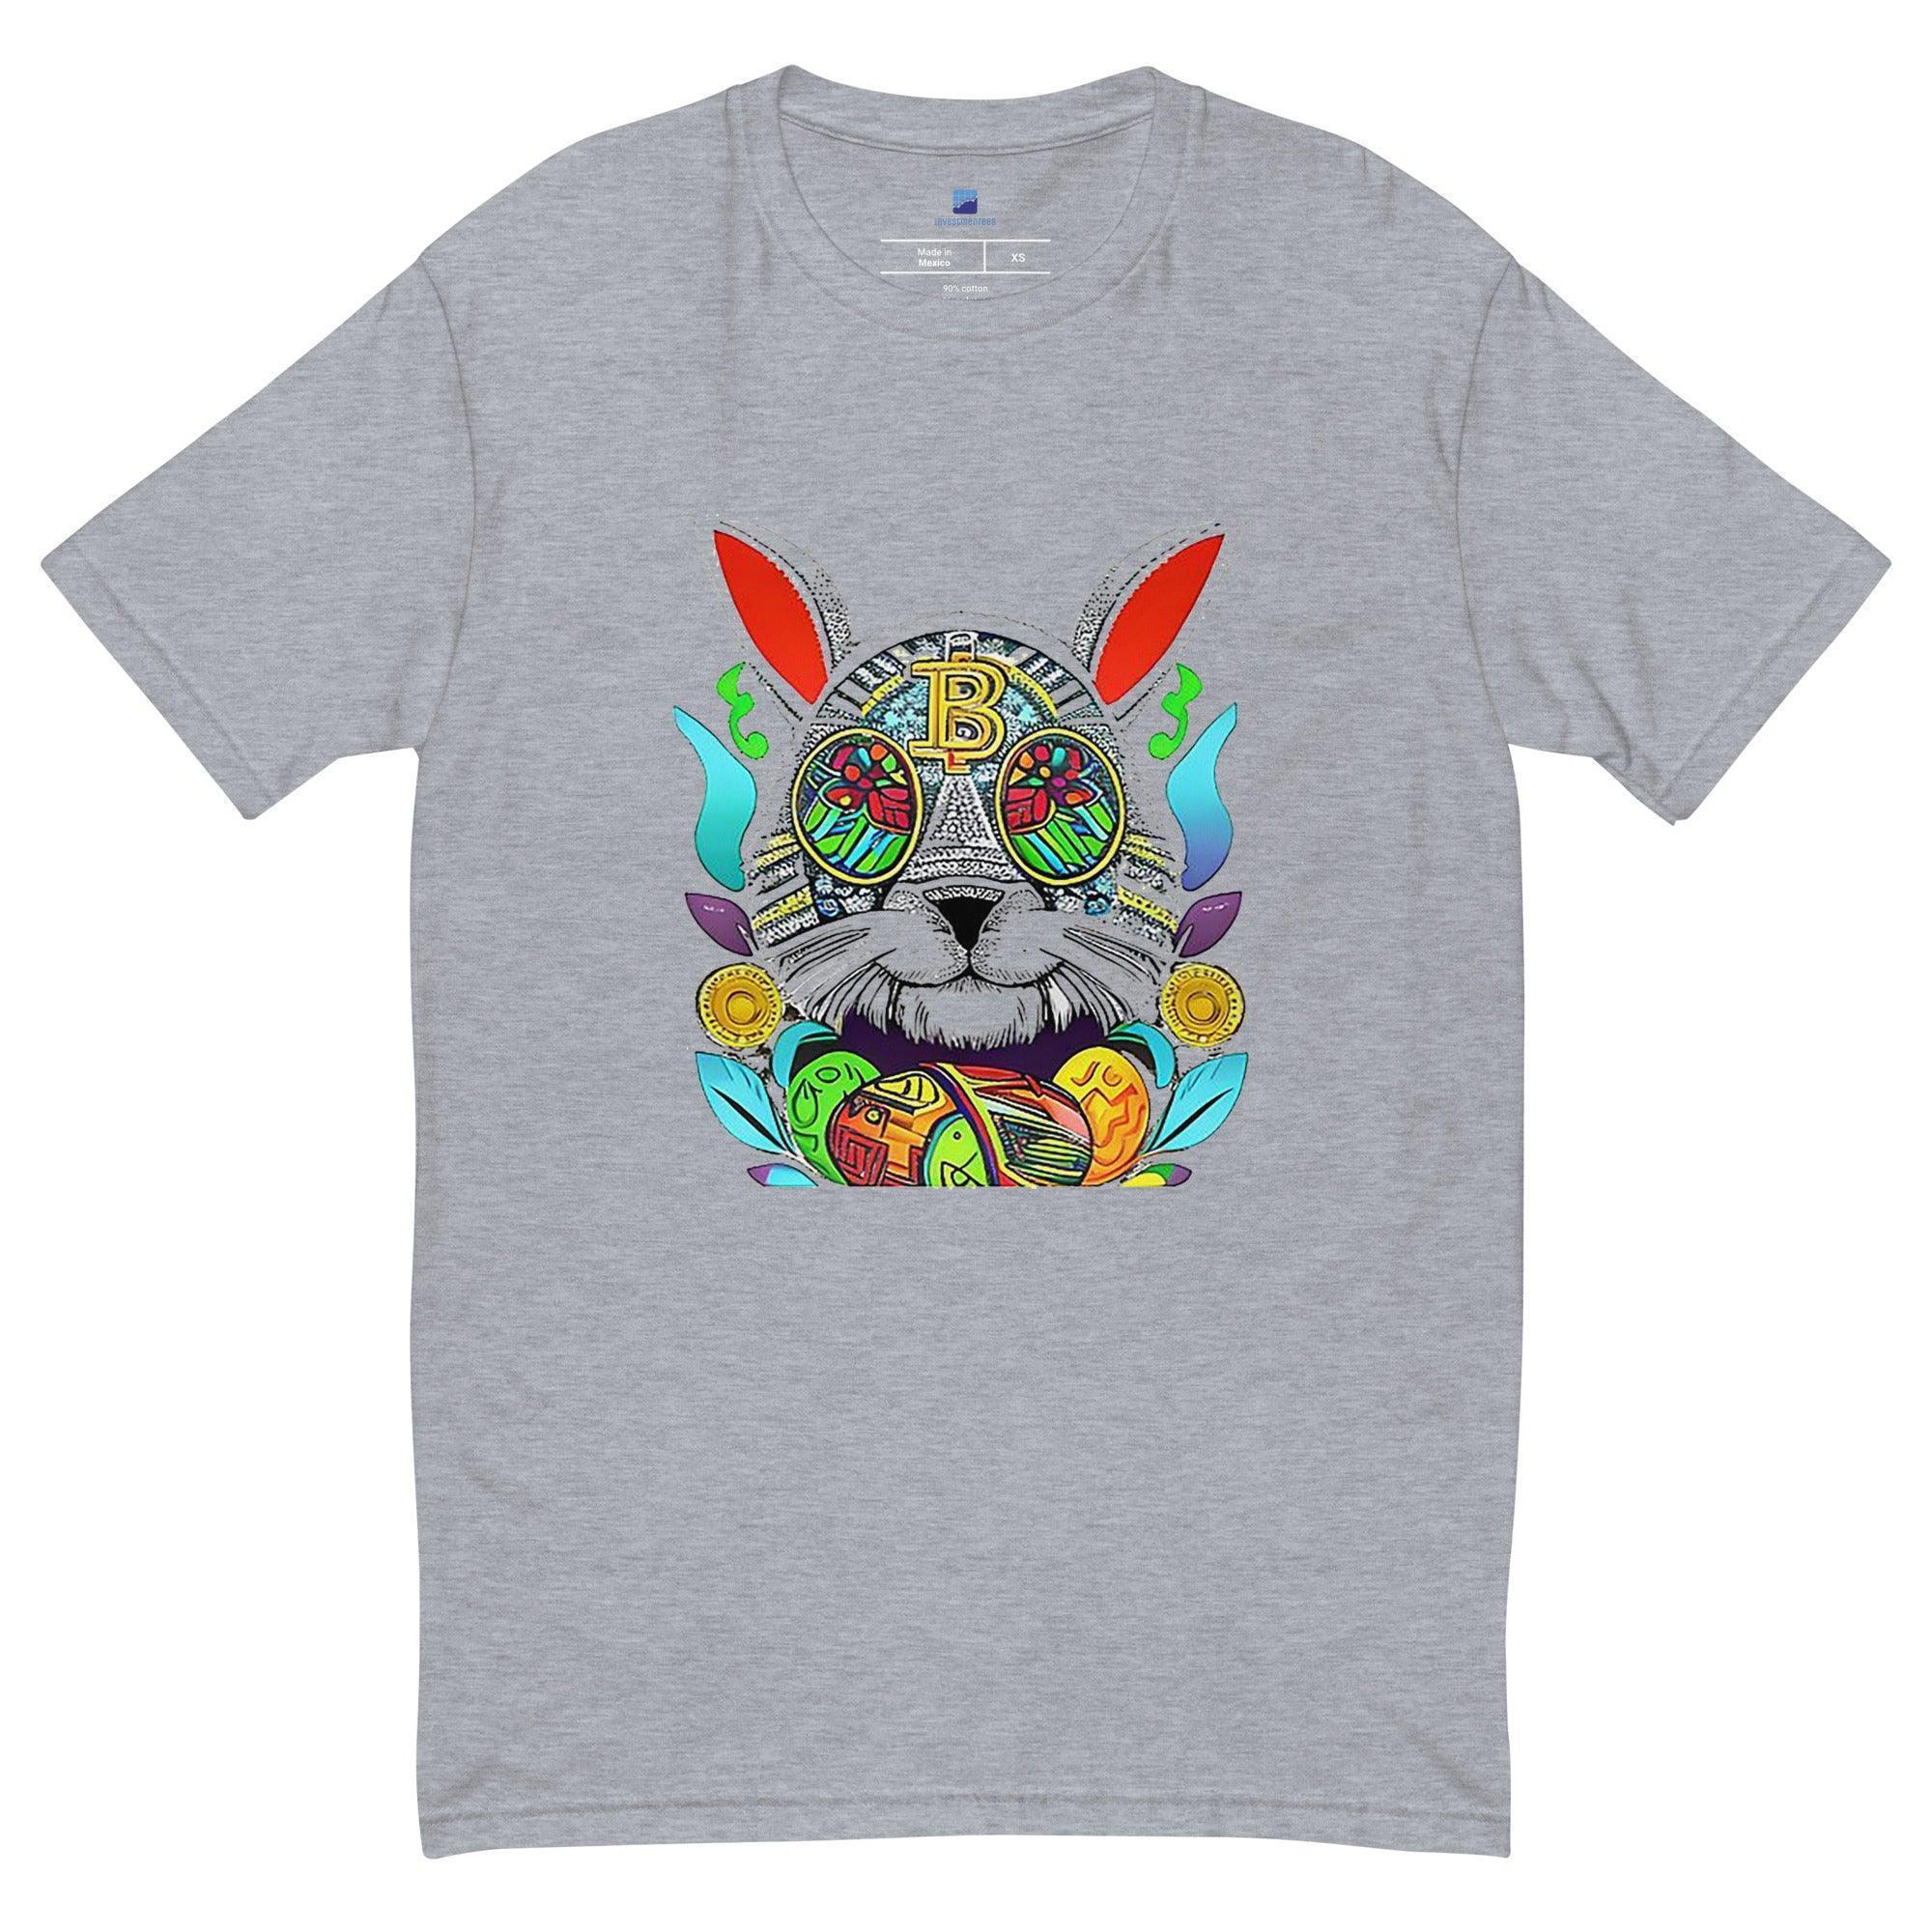 Bitcoin Easter Bunny T-Shirt - InvestmenTees